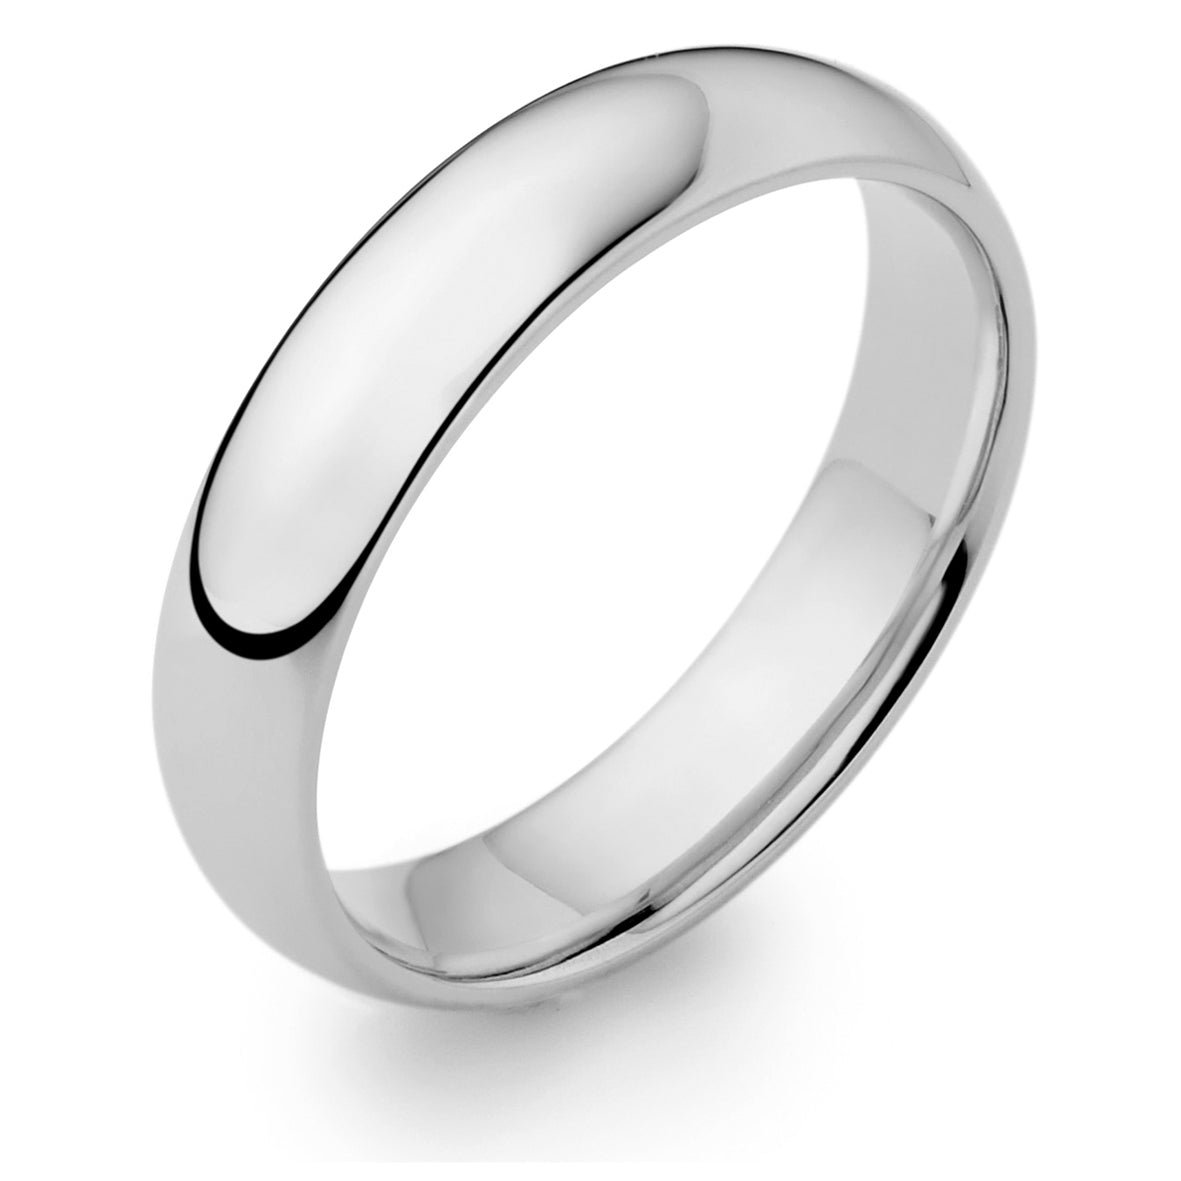 Men's 9ct White Gold 5mm Stand Court Wedding Ring